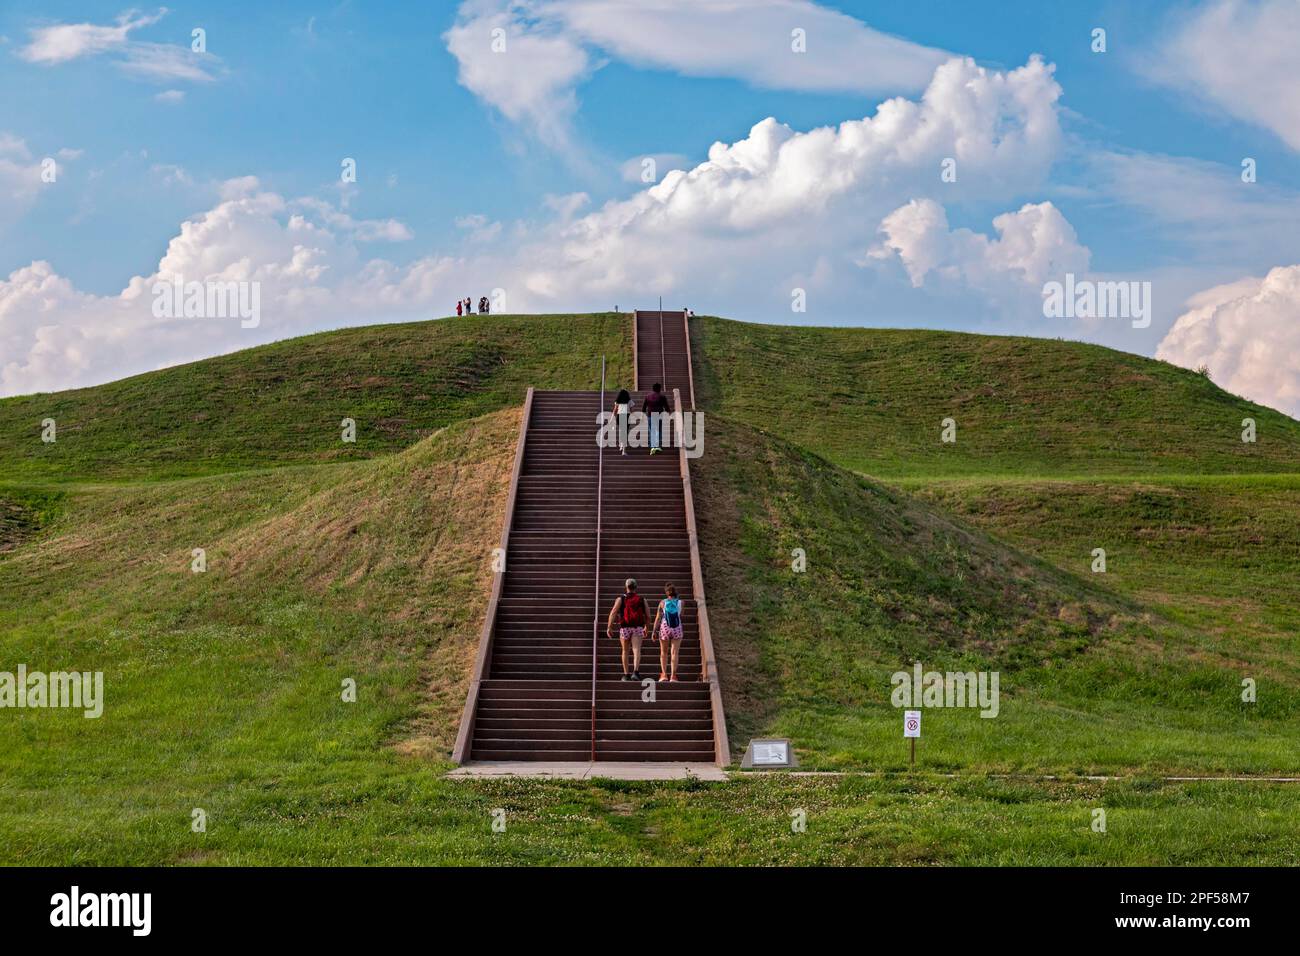 Monks Mound is the largest prehistoric earthen construction in the Americas, Chokia Mounds State Historic Site, Collinsville, Illinois, USA Stock Photo